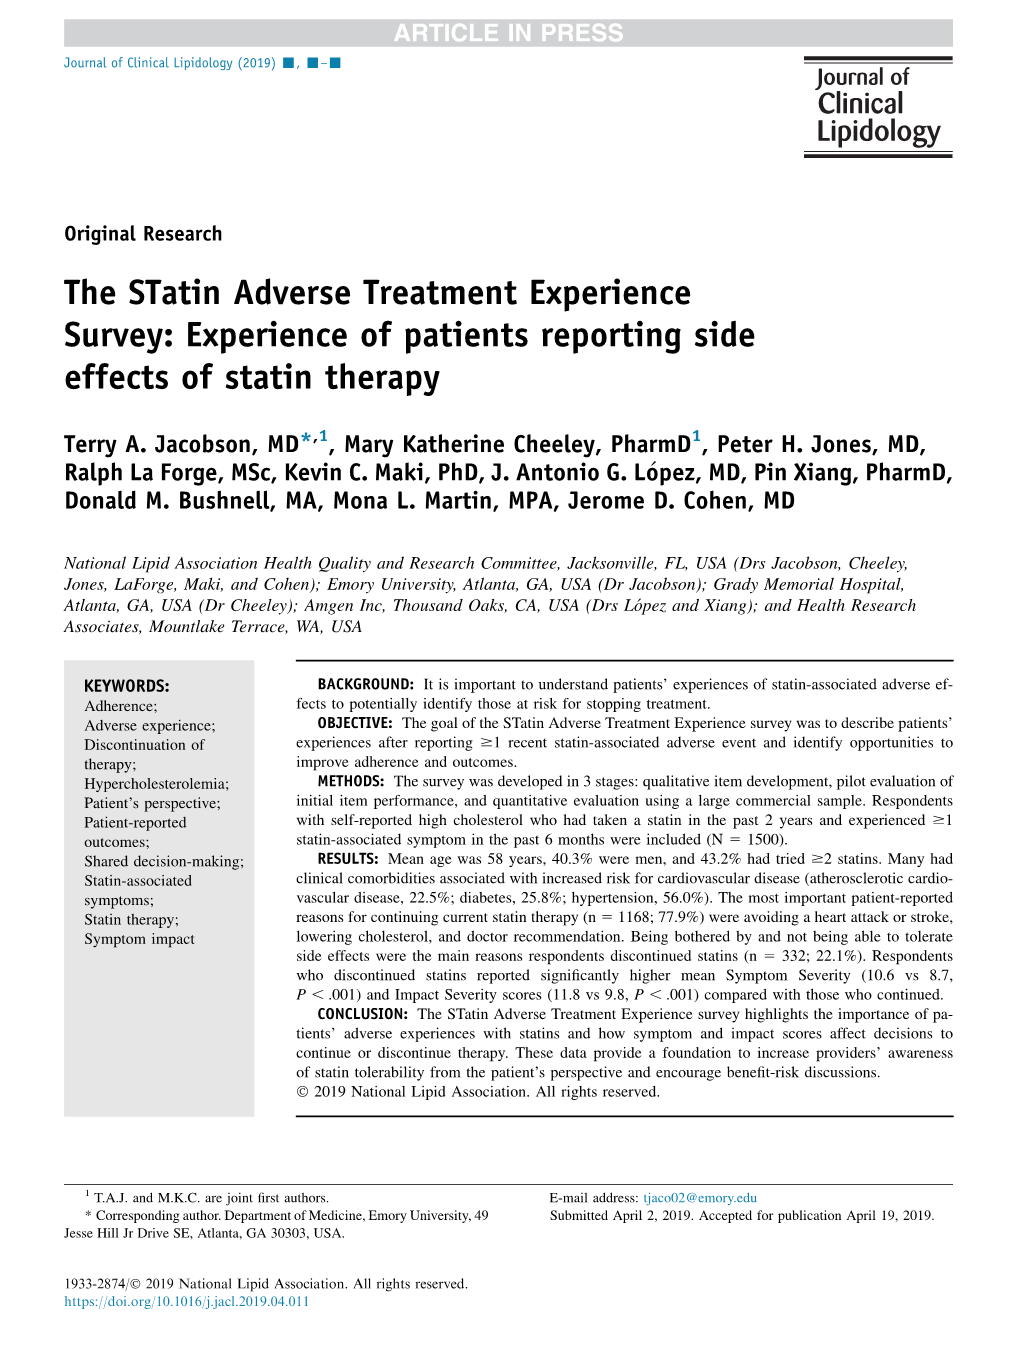 Experience of Patients Reporting Side Effects of Statin Therapy